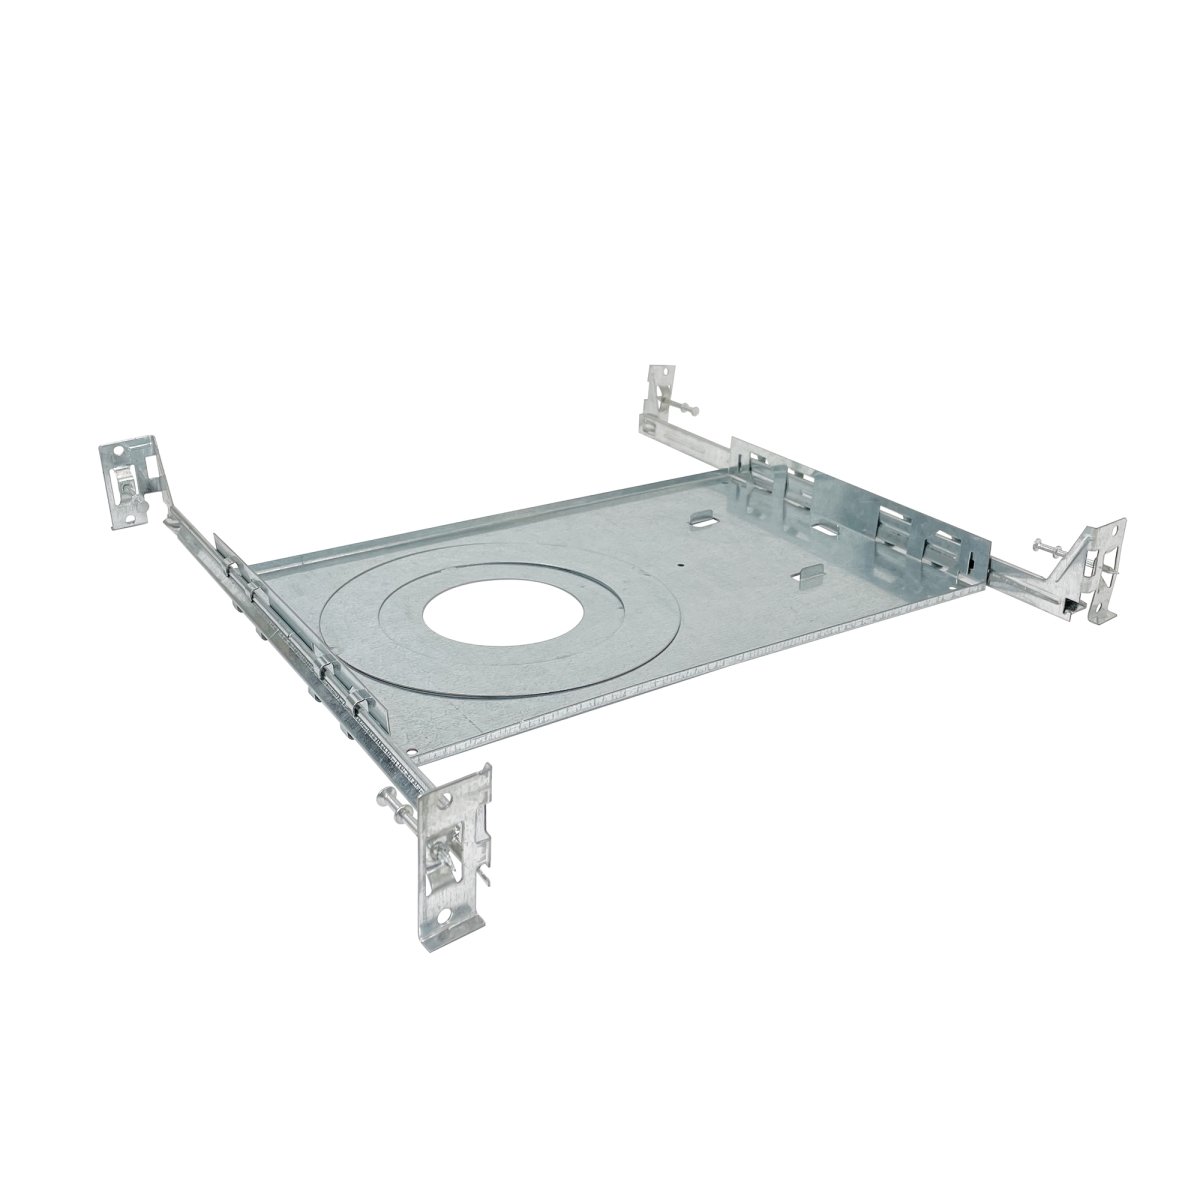 Picture of Nora Lighting NF-R246 2 in. M2 Universal Frame LED Recessed